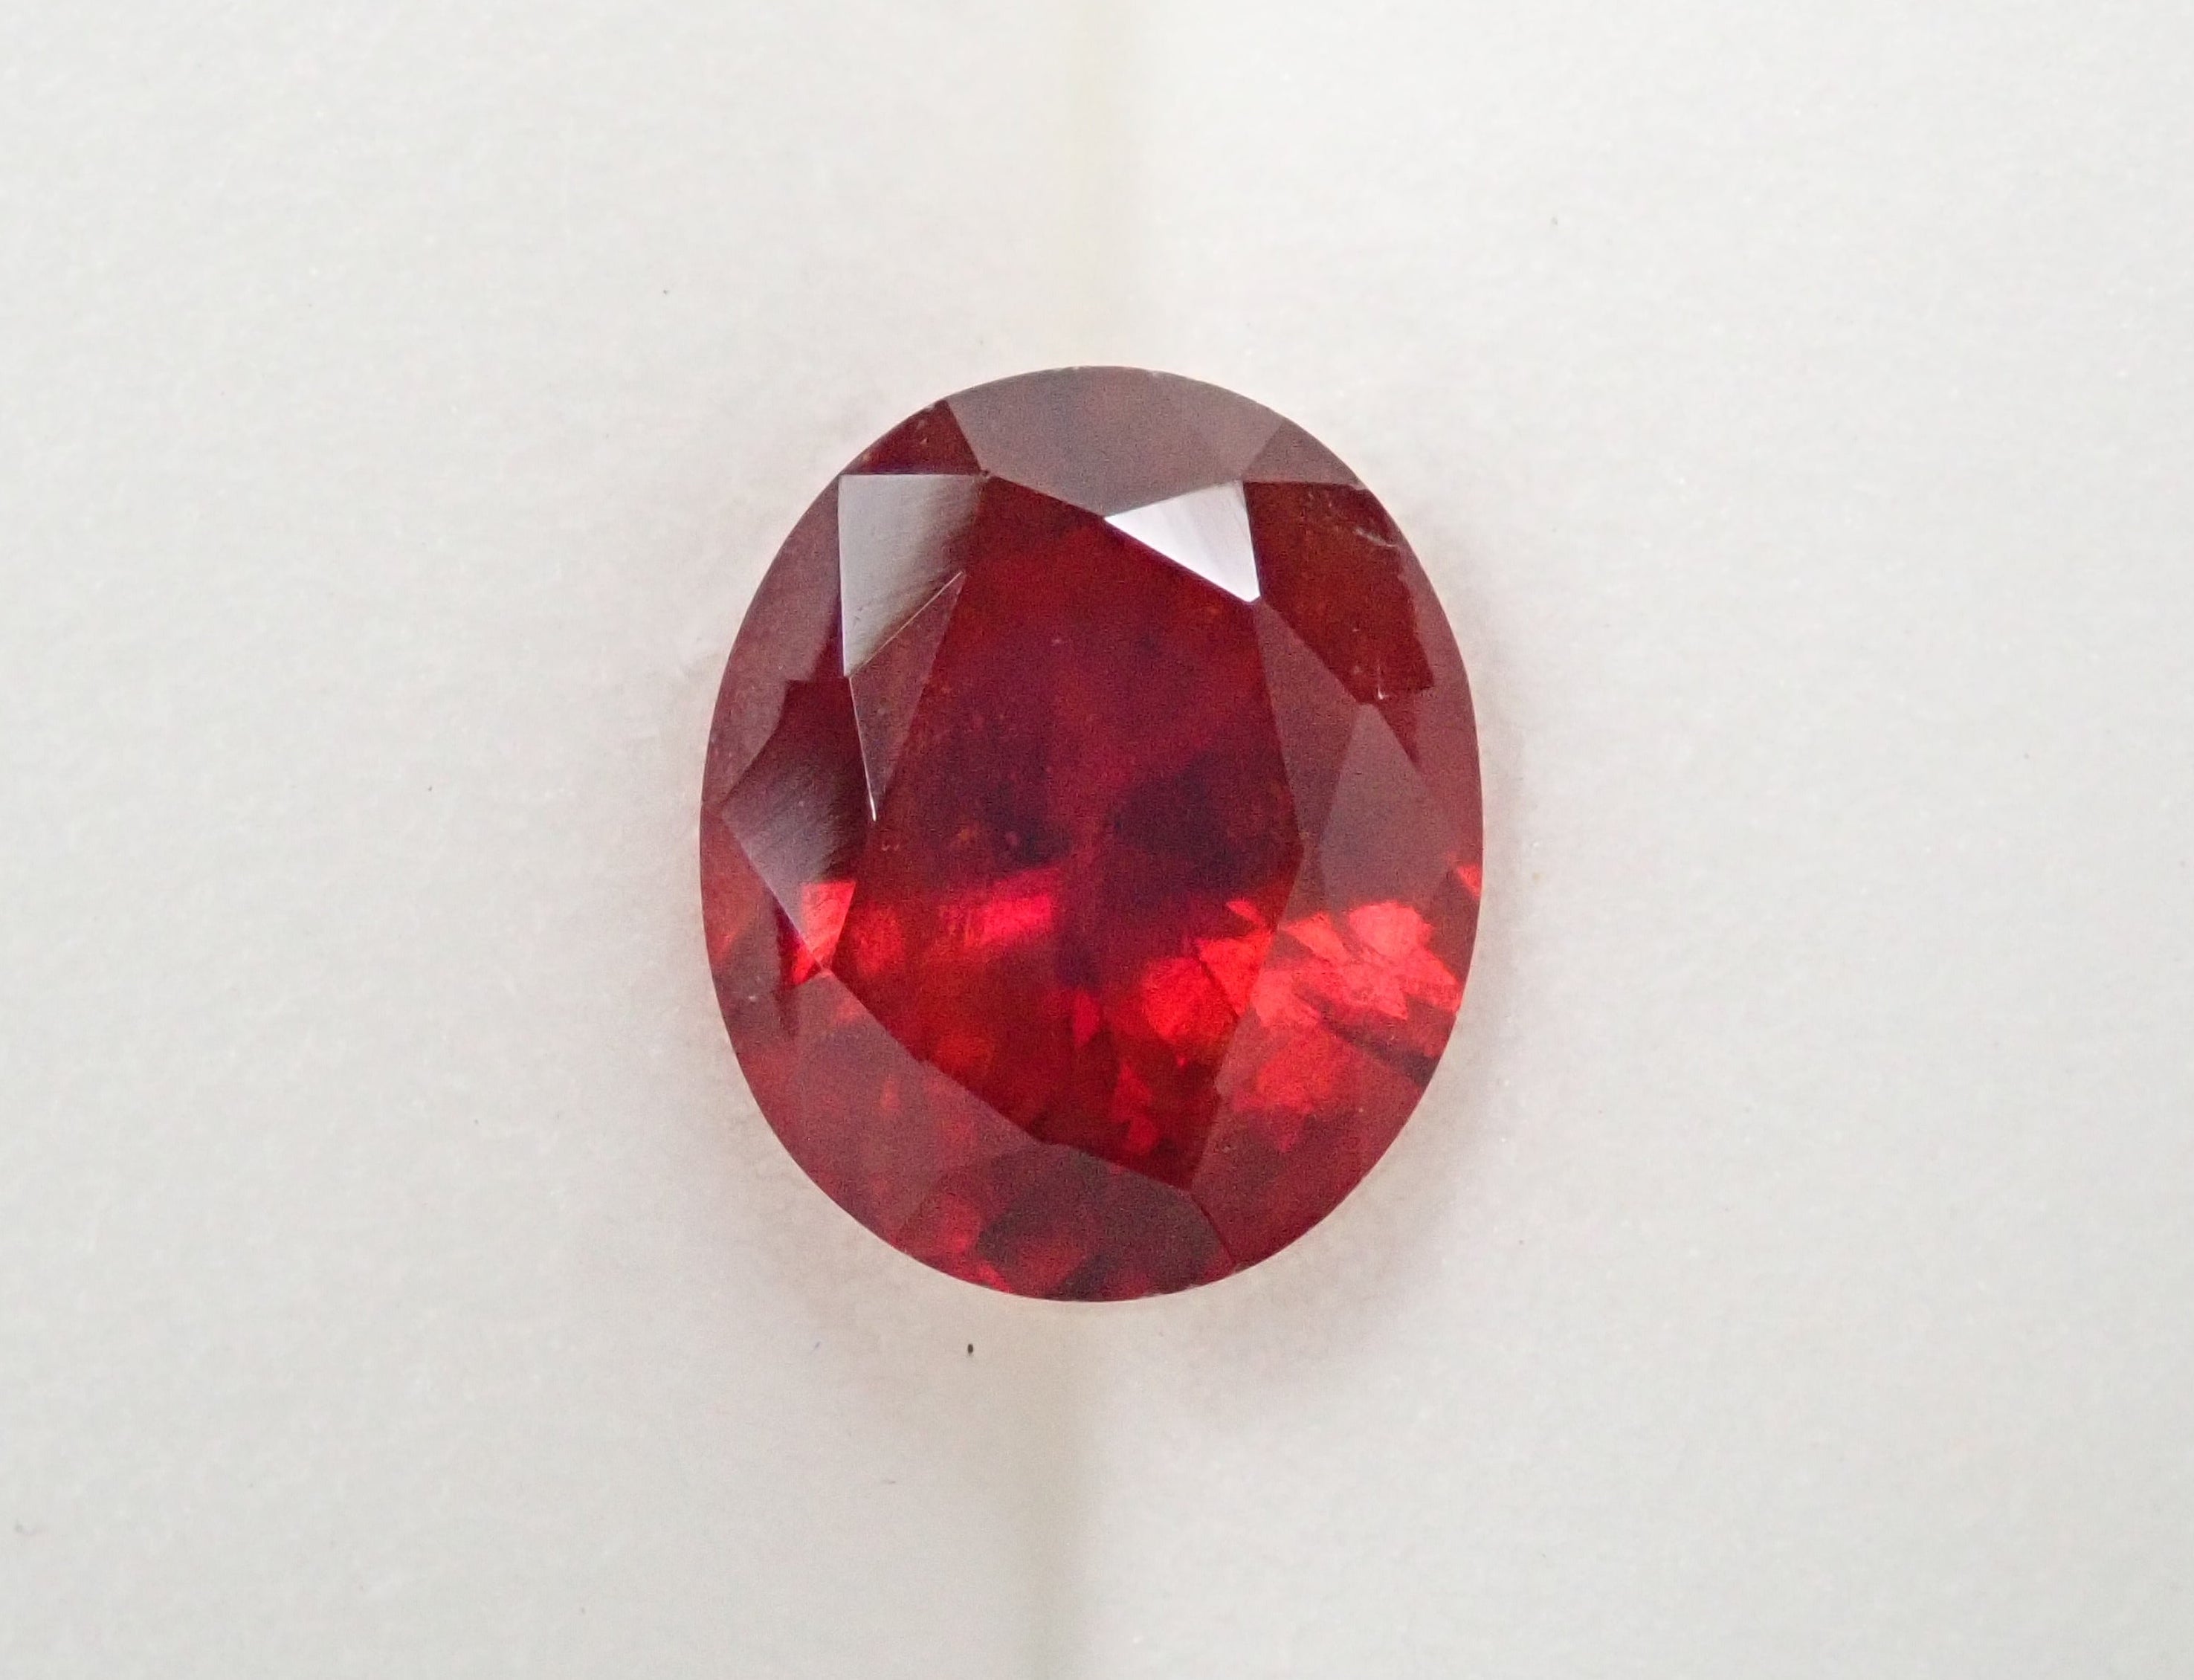 [12554329] 1.028ct Rhodochrosite loose stone from South Africa